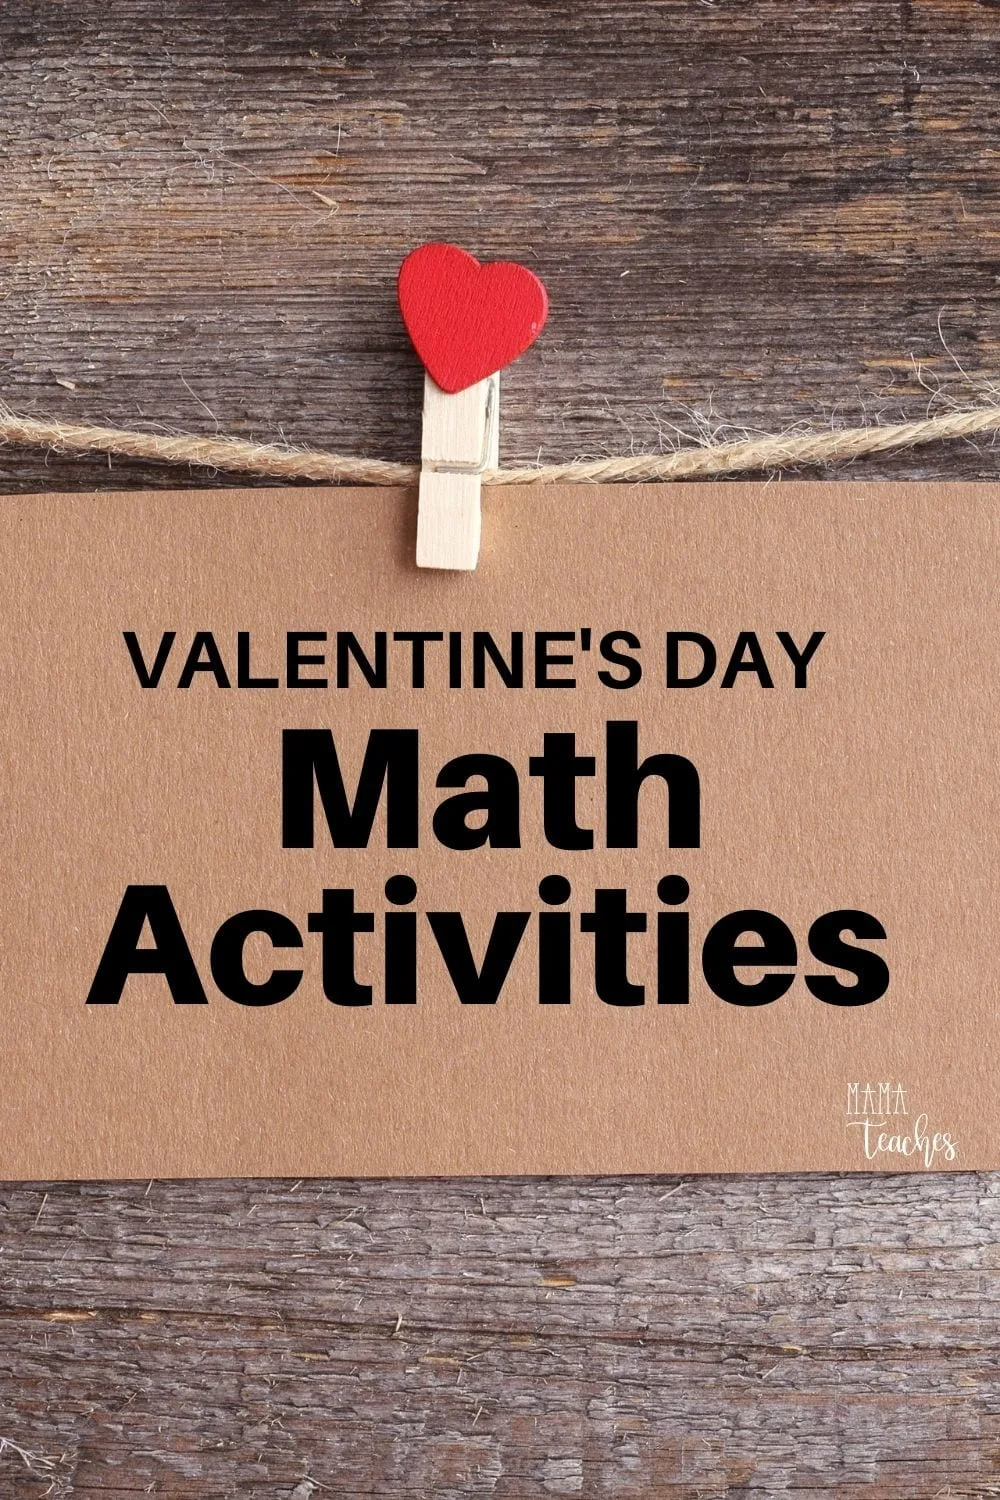 Valentine's Day Math Activities for Preschool and Elementary